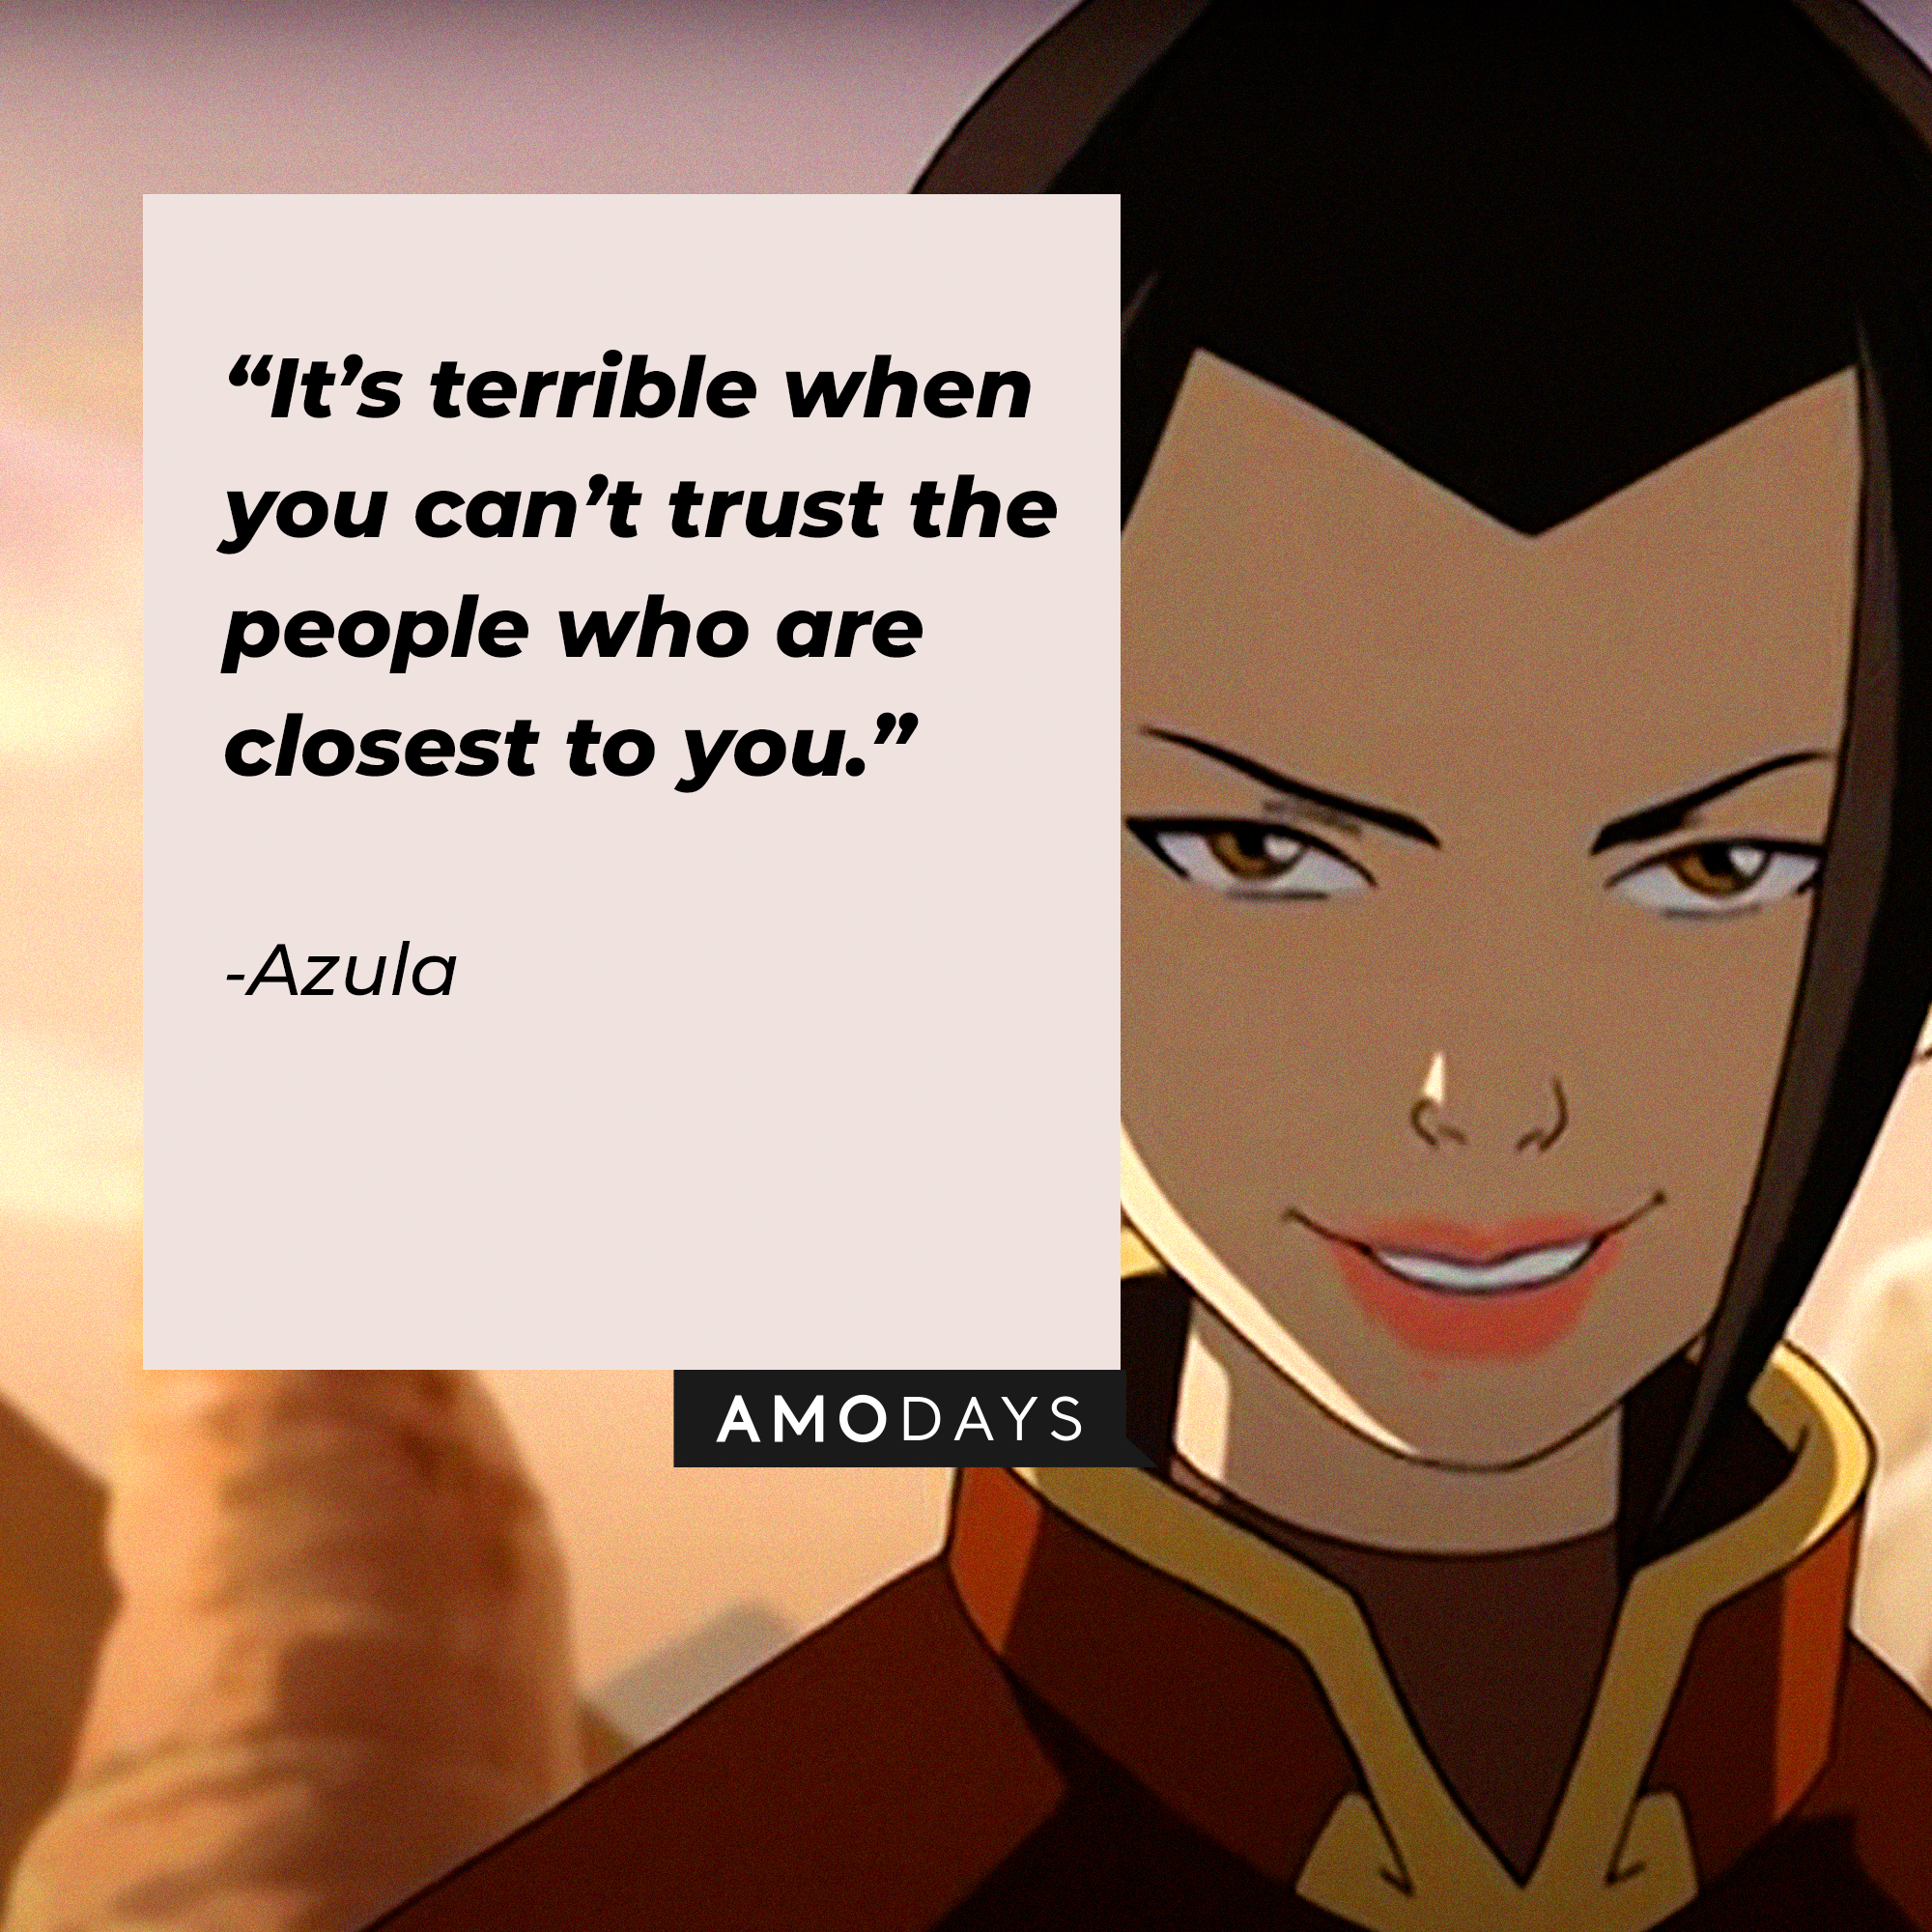 Azula's quote: “It’s terrible when you can’t trust the people who are closest to you.” | Source: youtube.com/TeamAvatar